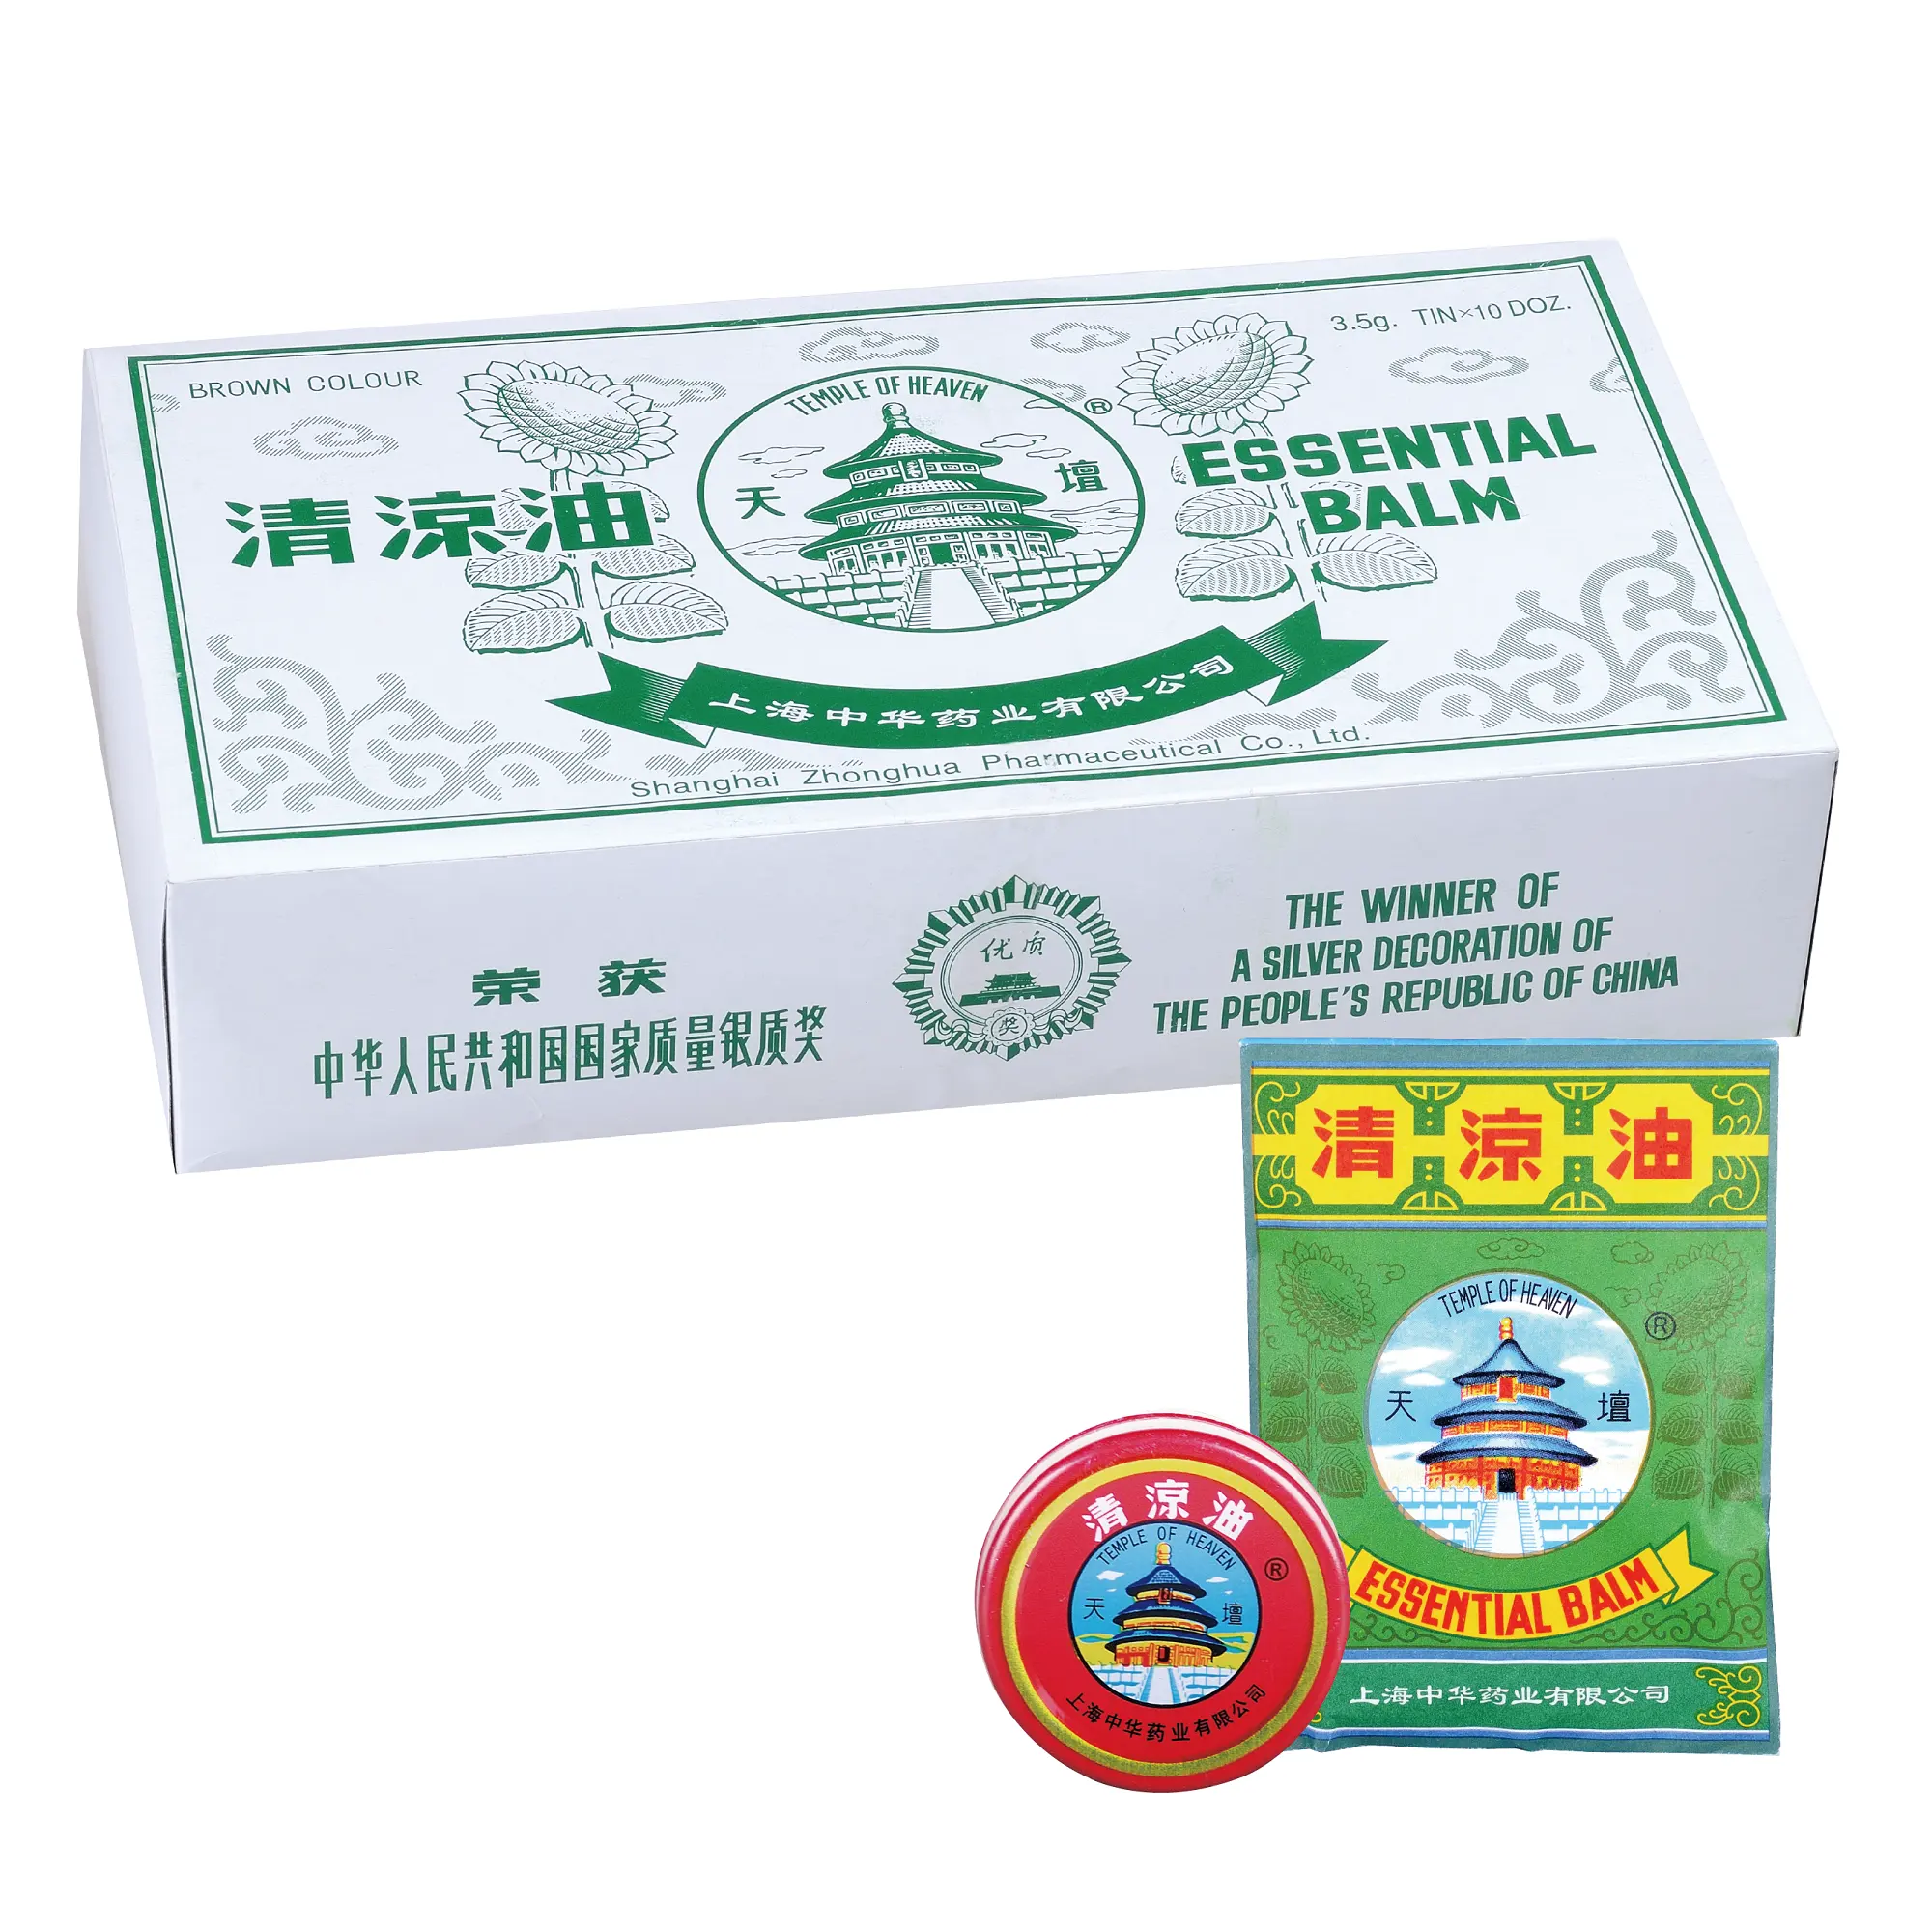 Deworming Panacea Back Pain Ointment Antipruritic Ointment Chinese Herb Medicine